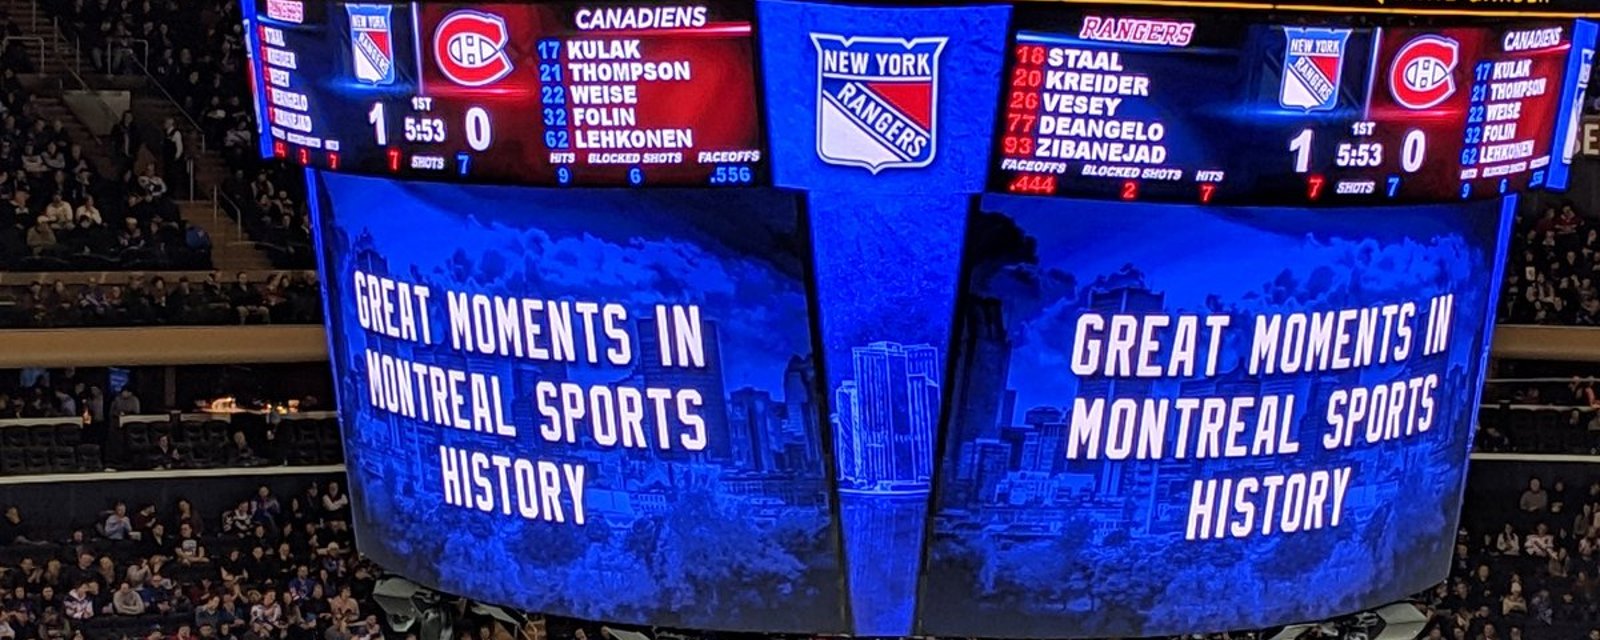 Rangers troll Habs with brutal “greatest moments in MTL sports history” video